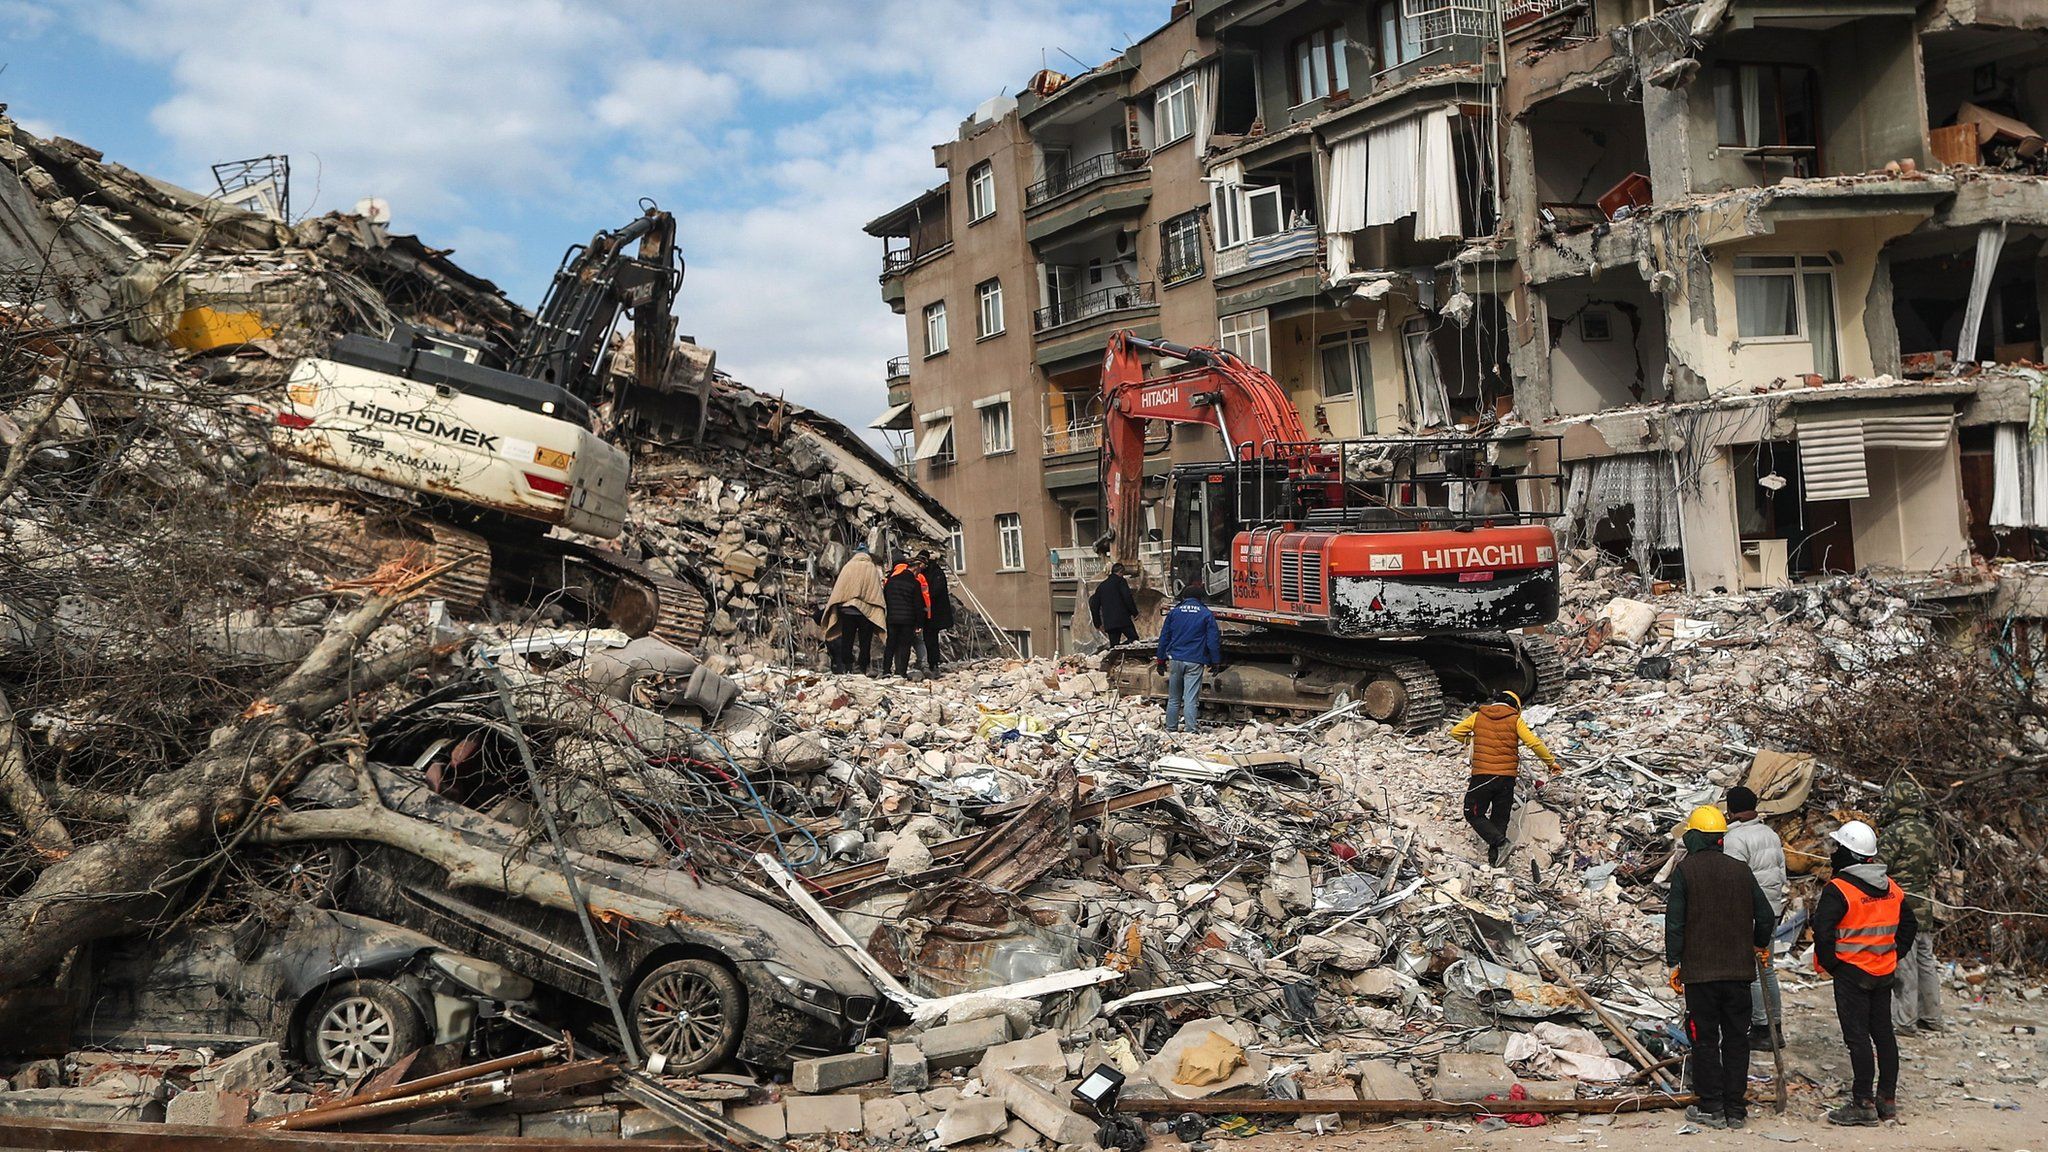 Excavators work on a collapsed building after a powerful earthquake in Hatay, Turkey